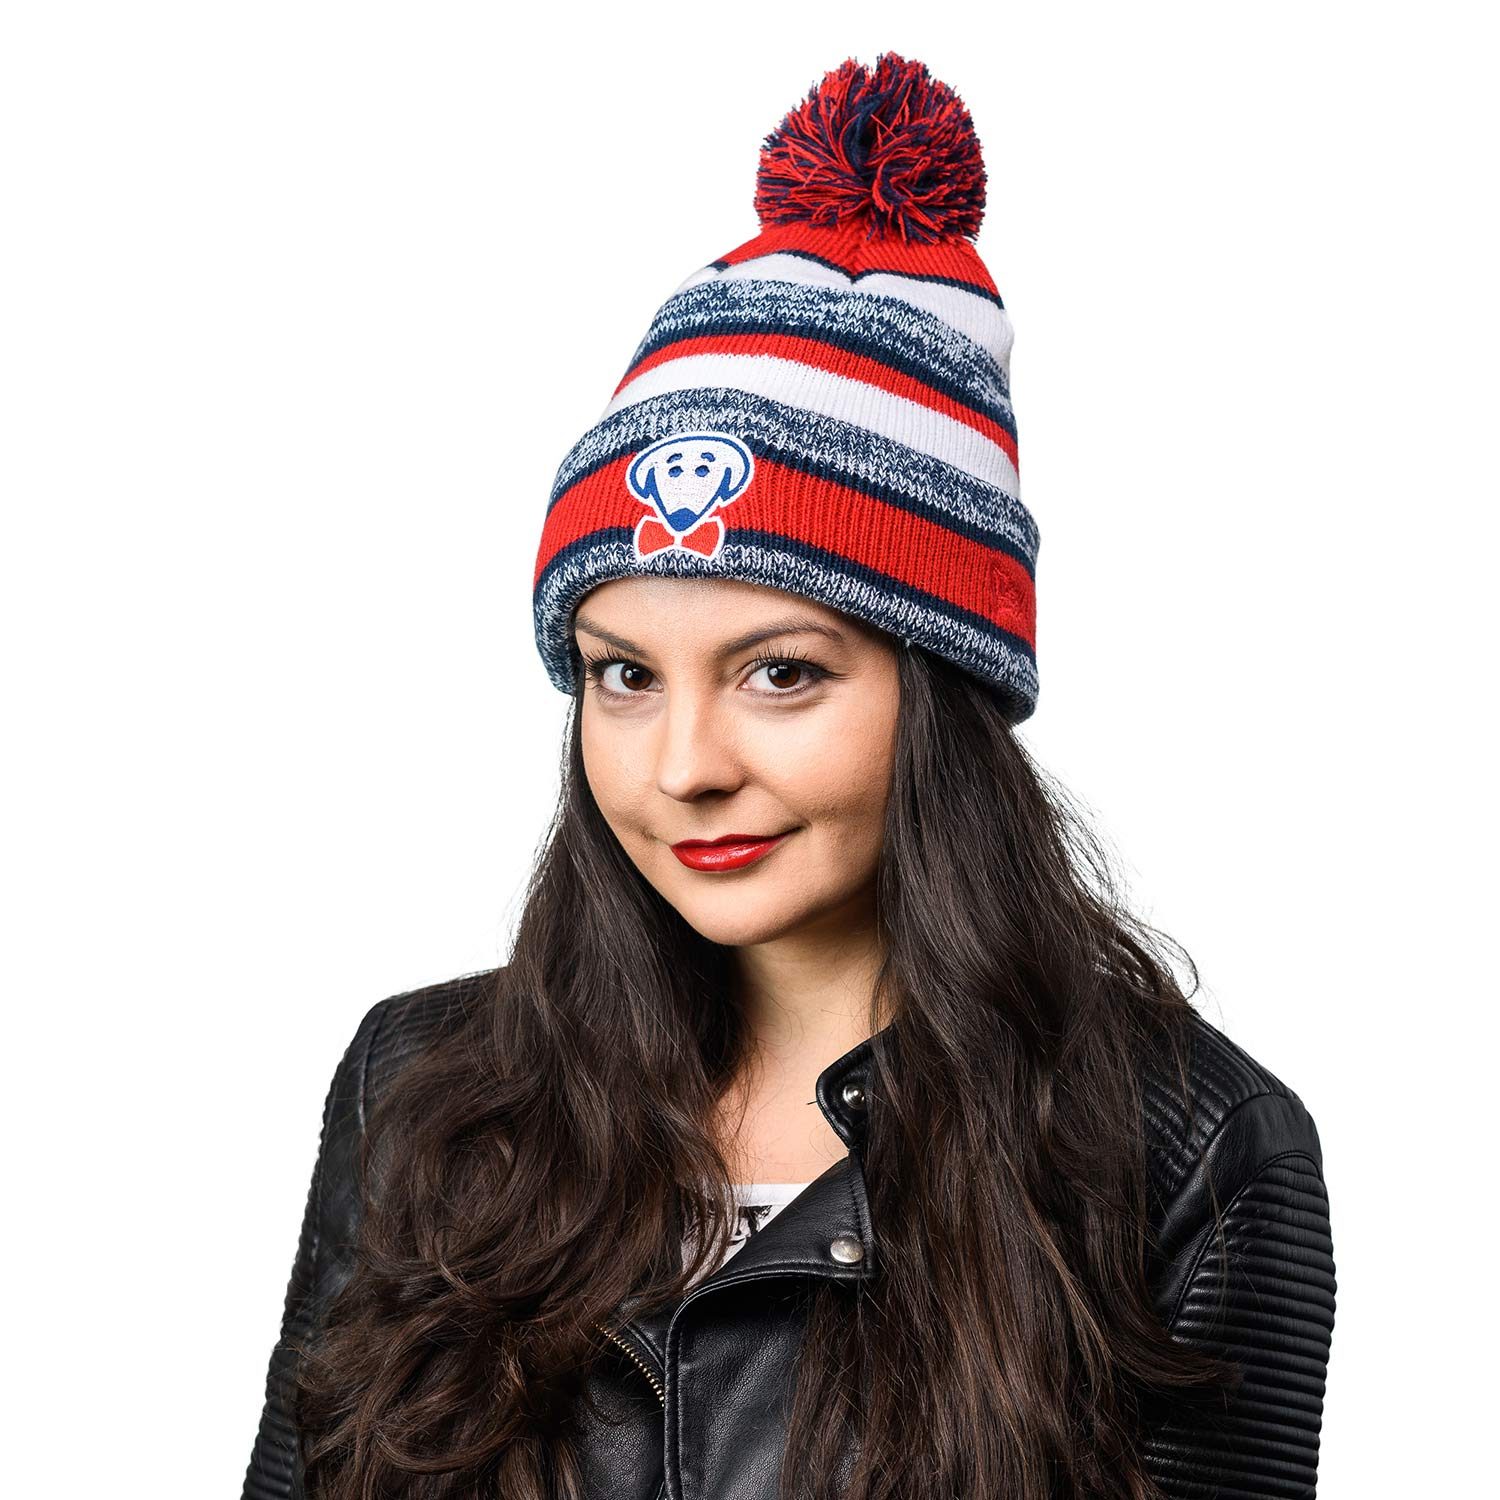 She looks this good AND she's staying warm! - Mosi winter knit hat by Beau Tyler